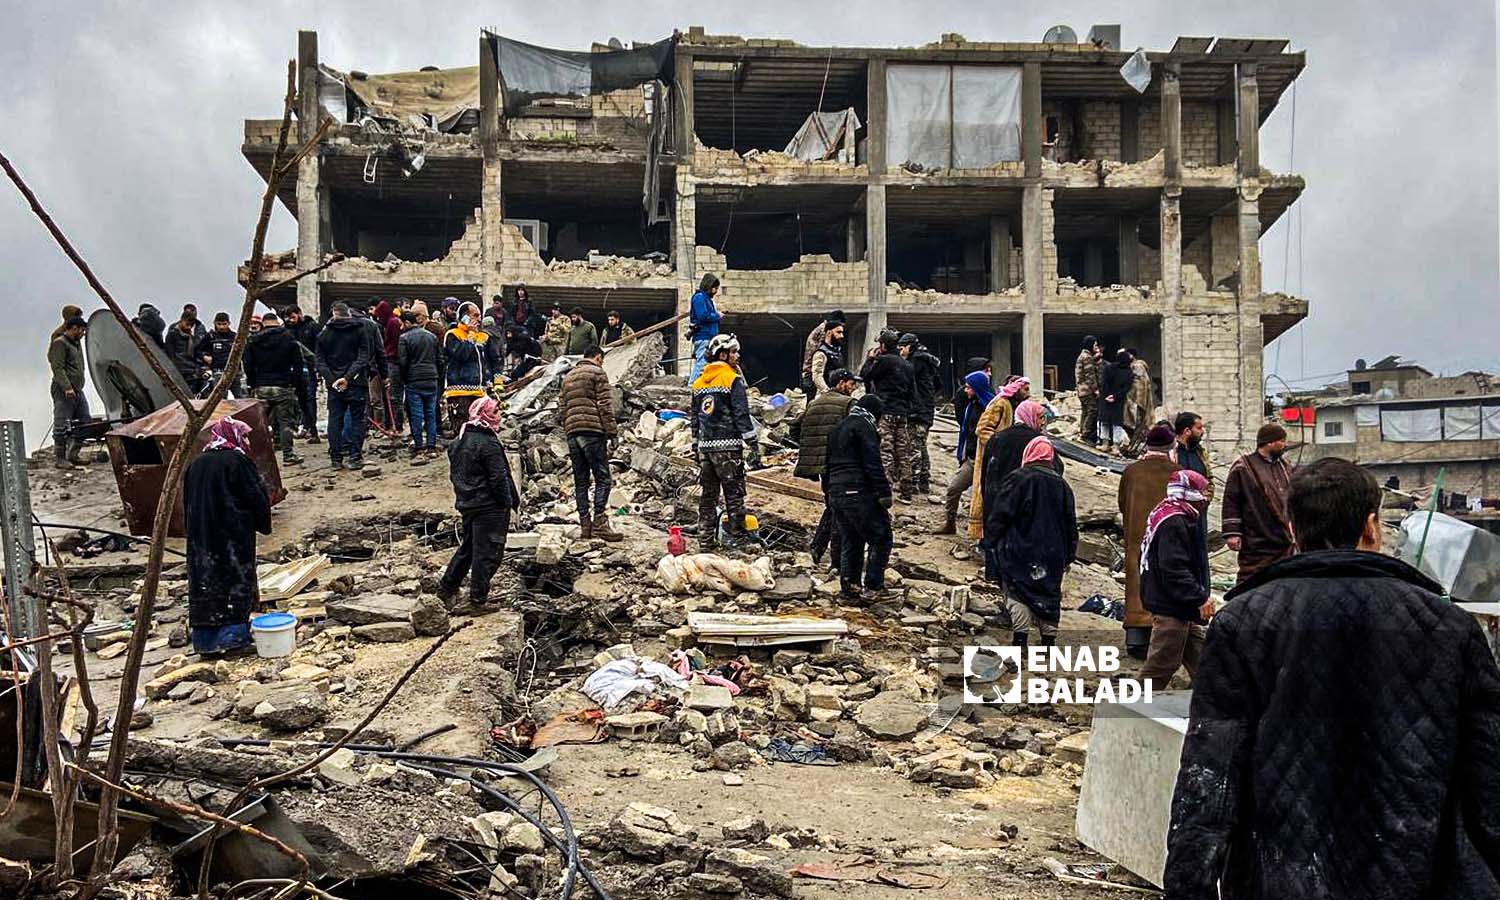 Volunteers and locals try to rescue and lift victims from under the rubble in Jindires district, rural Afrin, following the strong earthquake that hit the northwestern Syrian region - 6 February 2023 (Enab Baladi/Amir Kharboutli)
